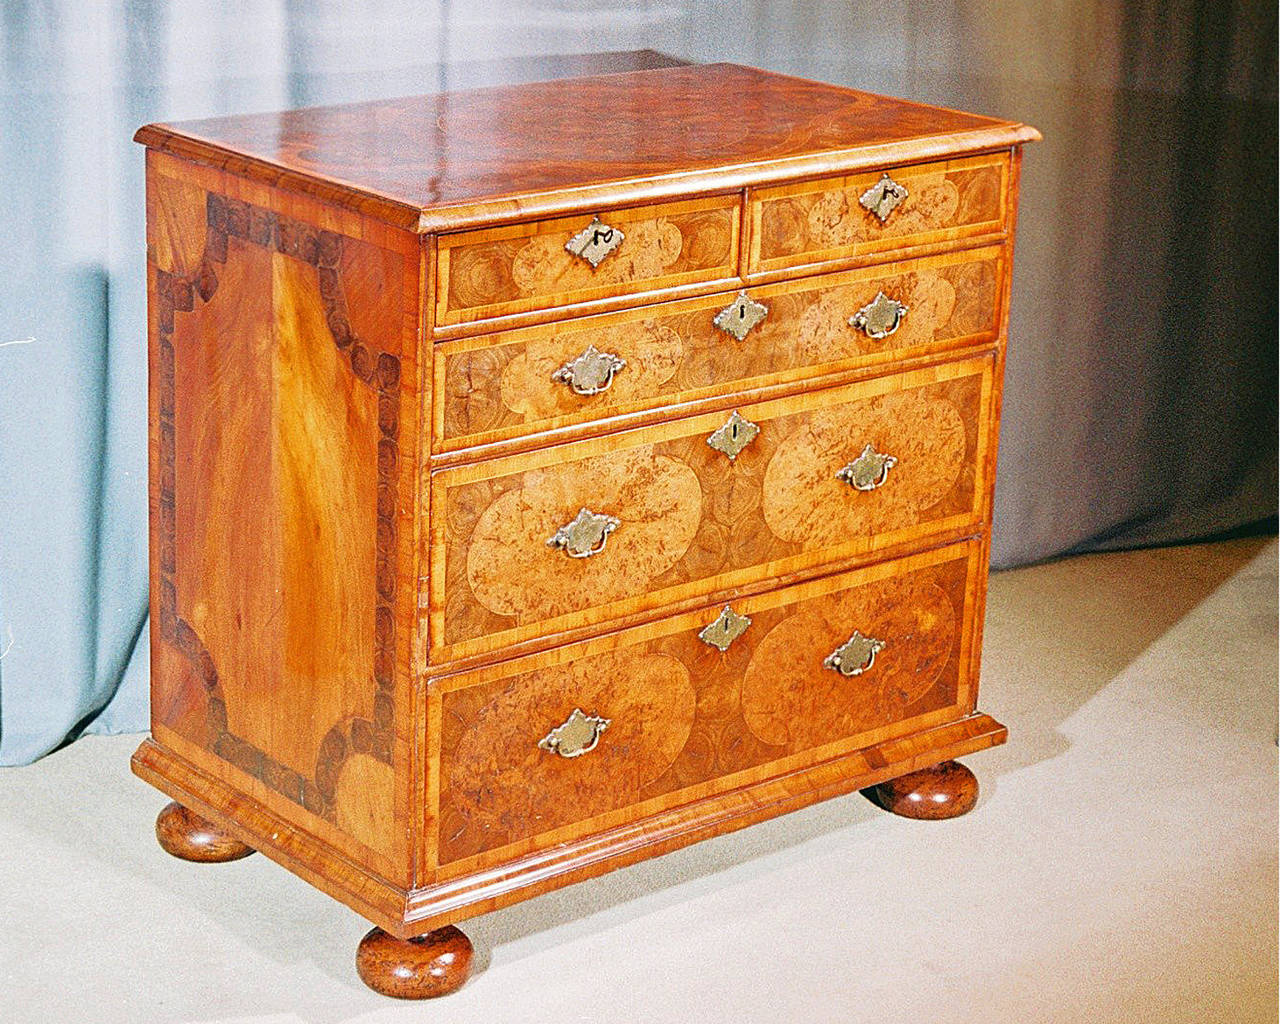 Cross-Banded William and Mary Period Oyster Veneered Chest of Drawers